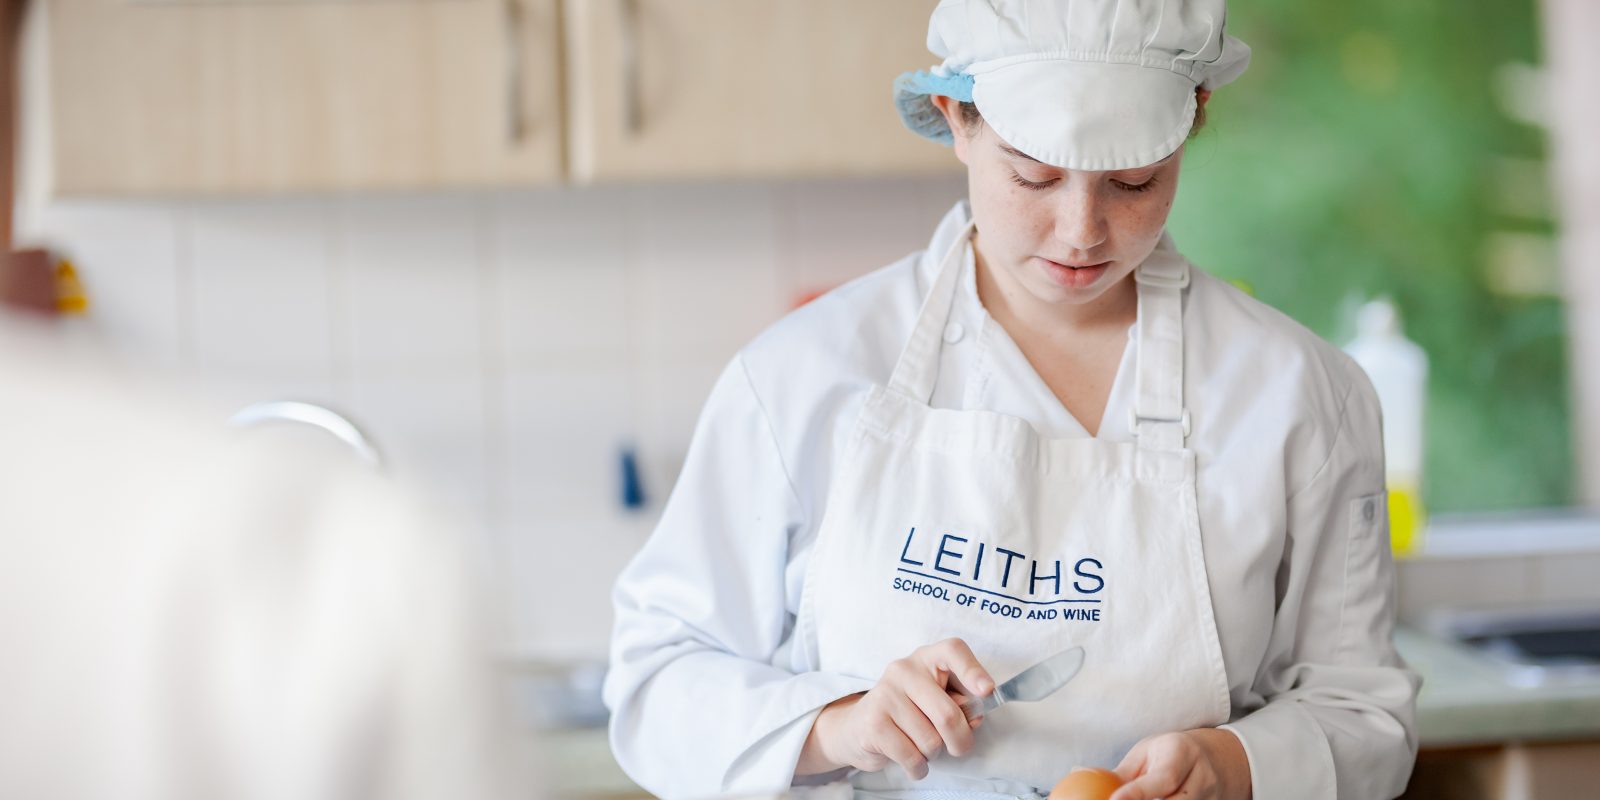 Leiths Cookery kitchen